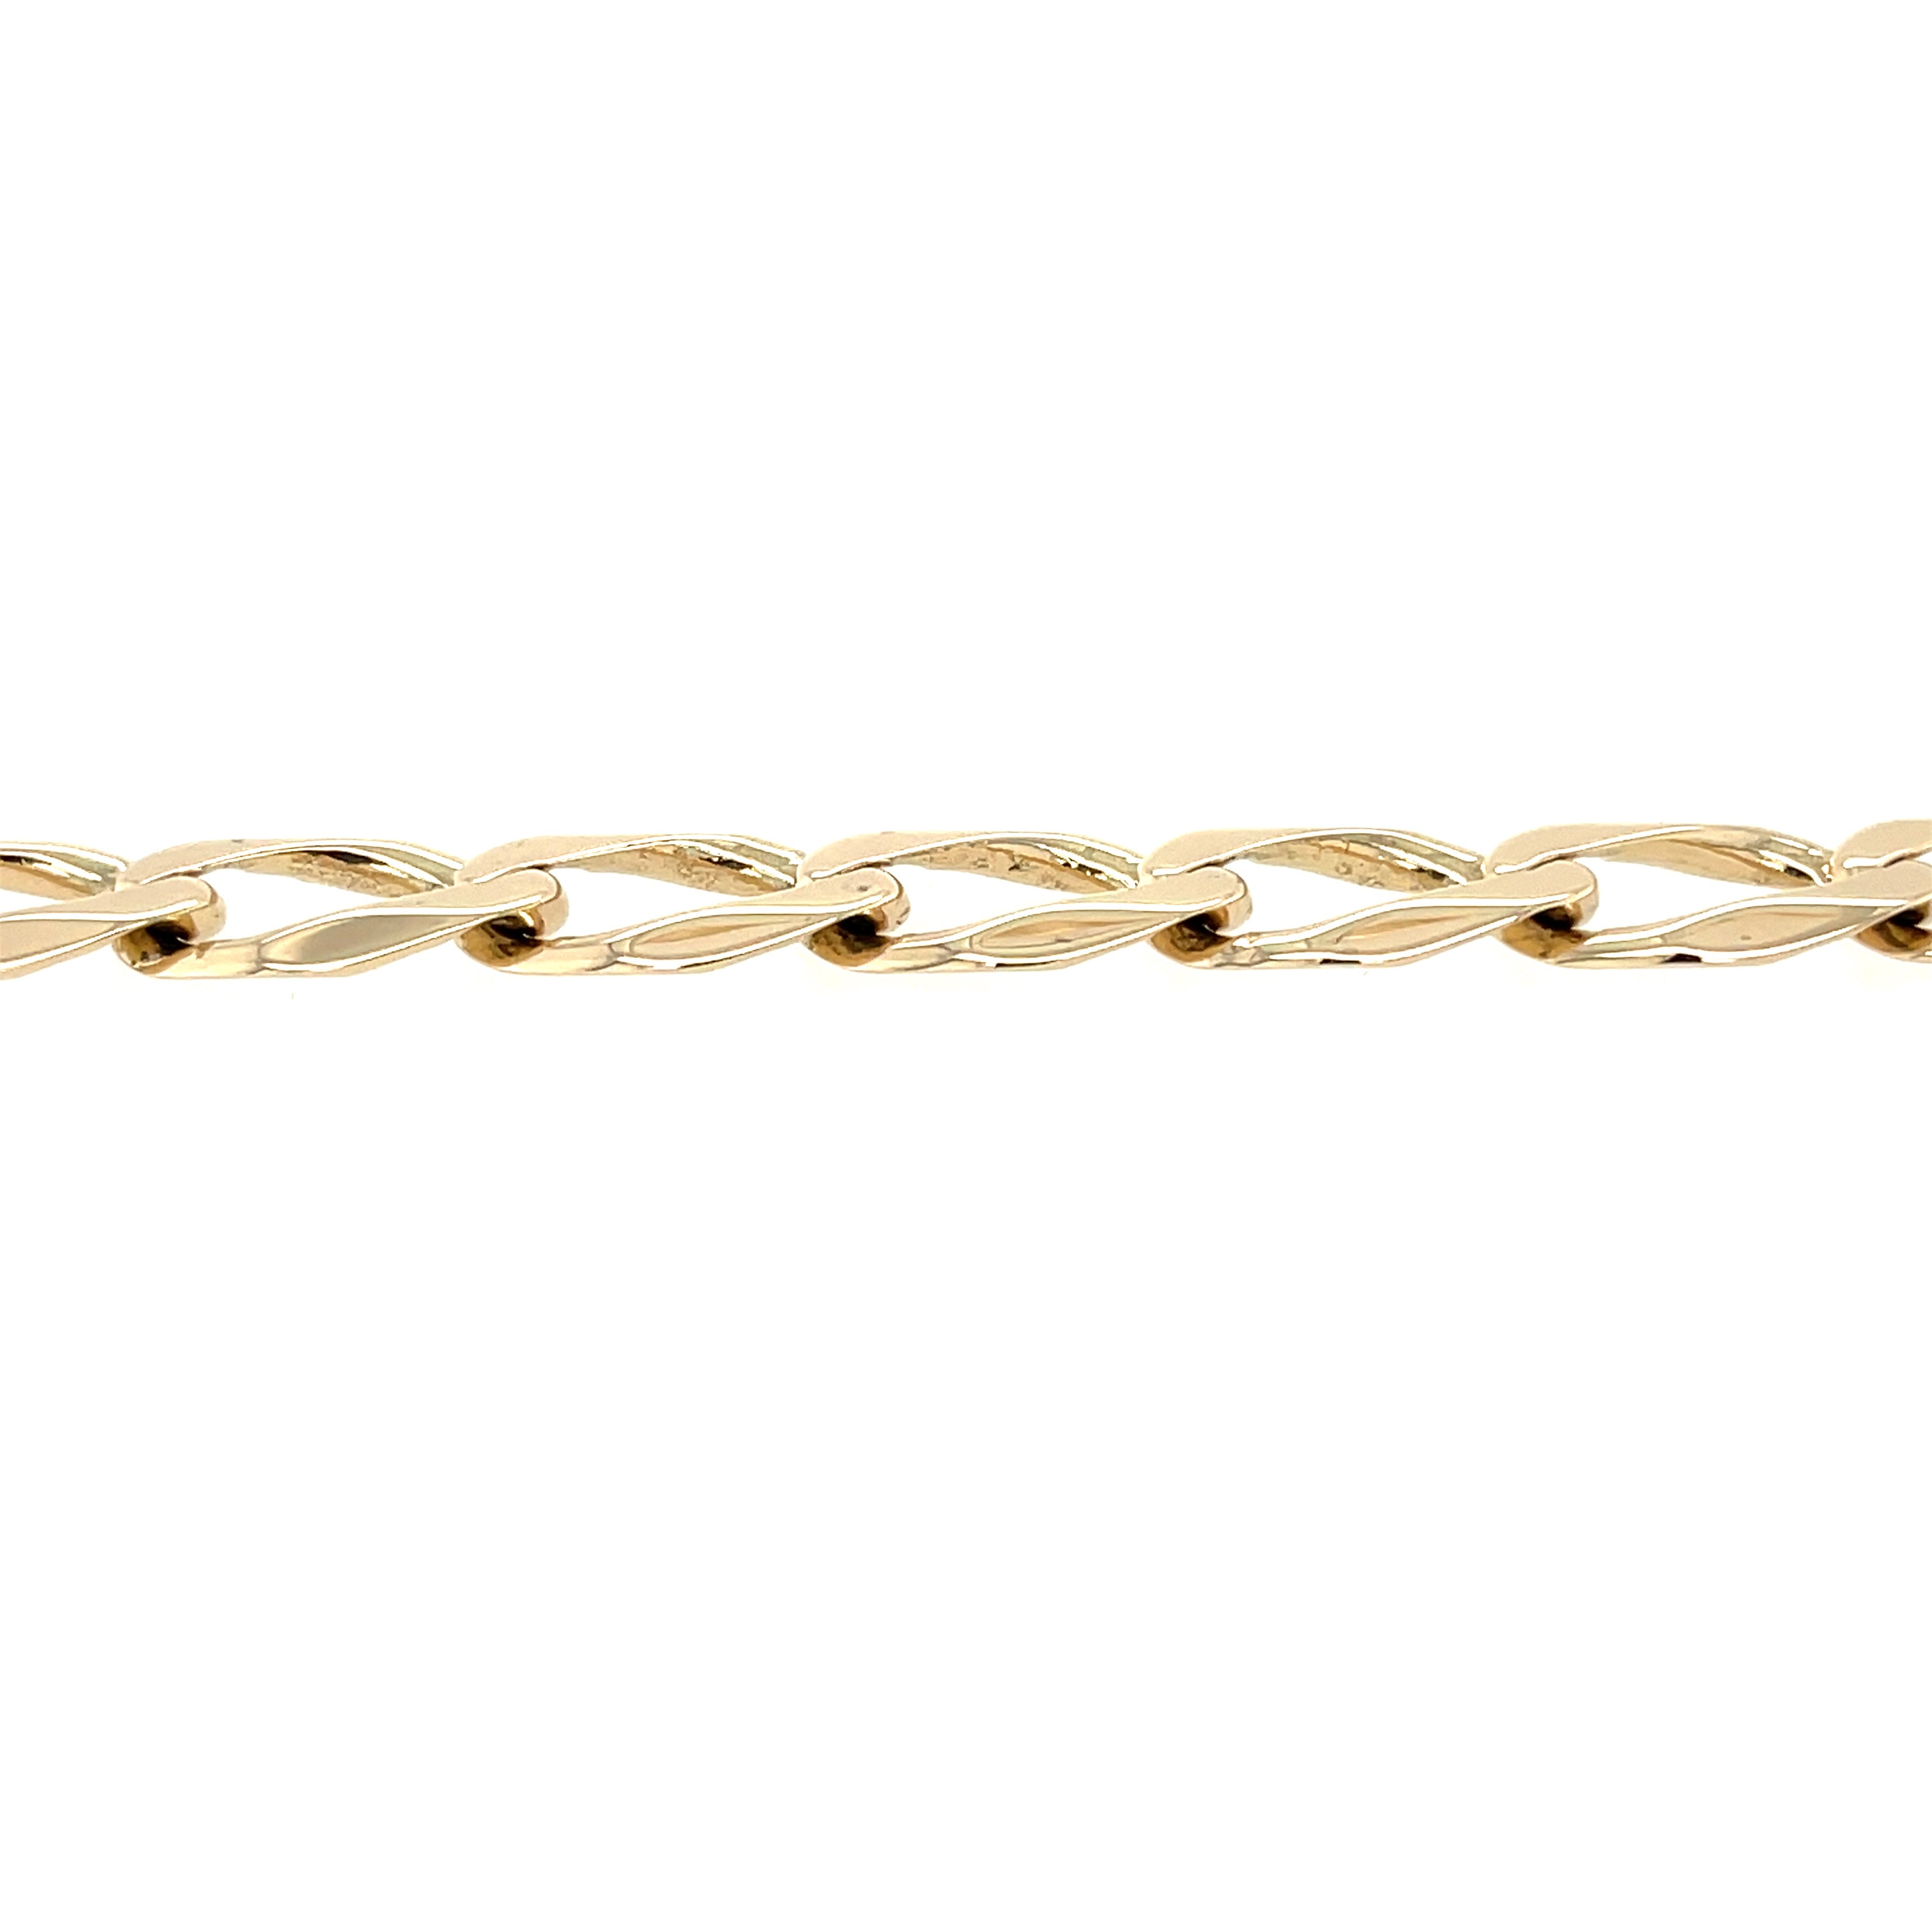 9ct Yellow Gold 9 Inch Elongated Curb Link Bracelet - 18.31g